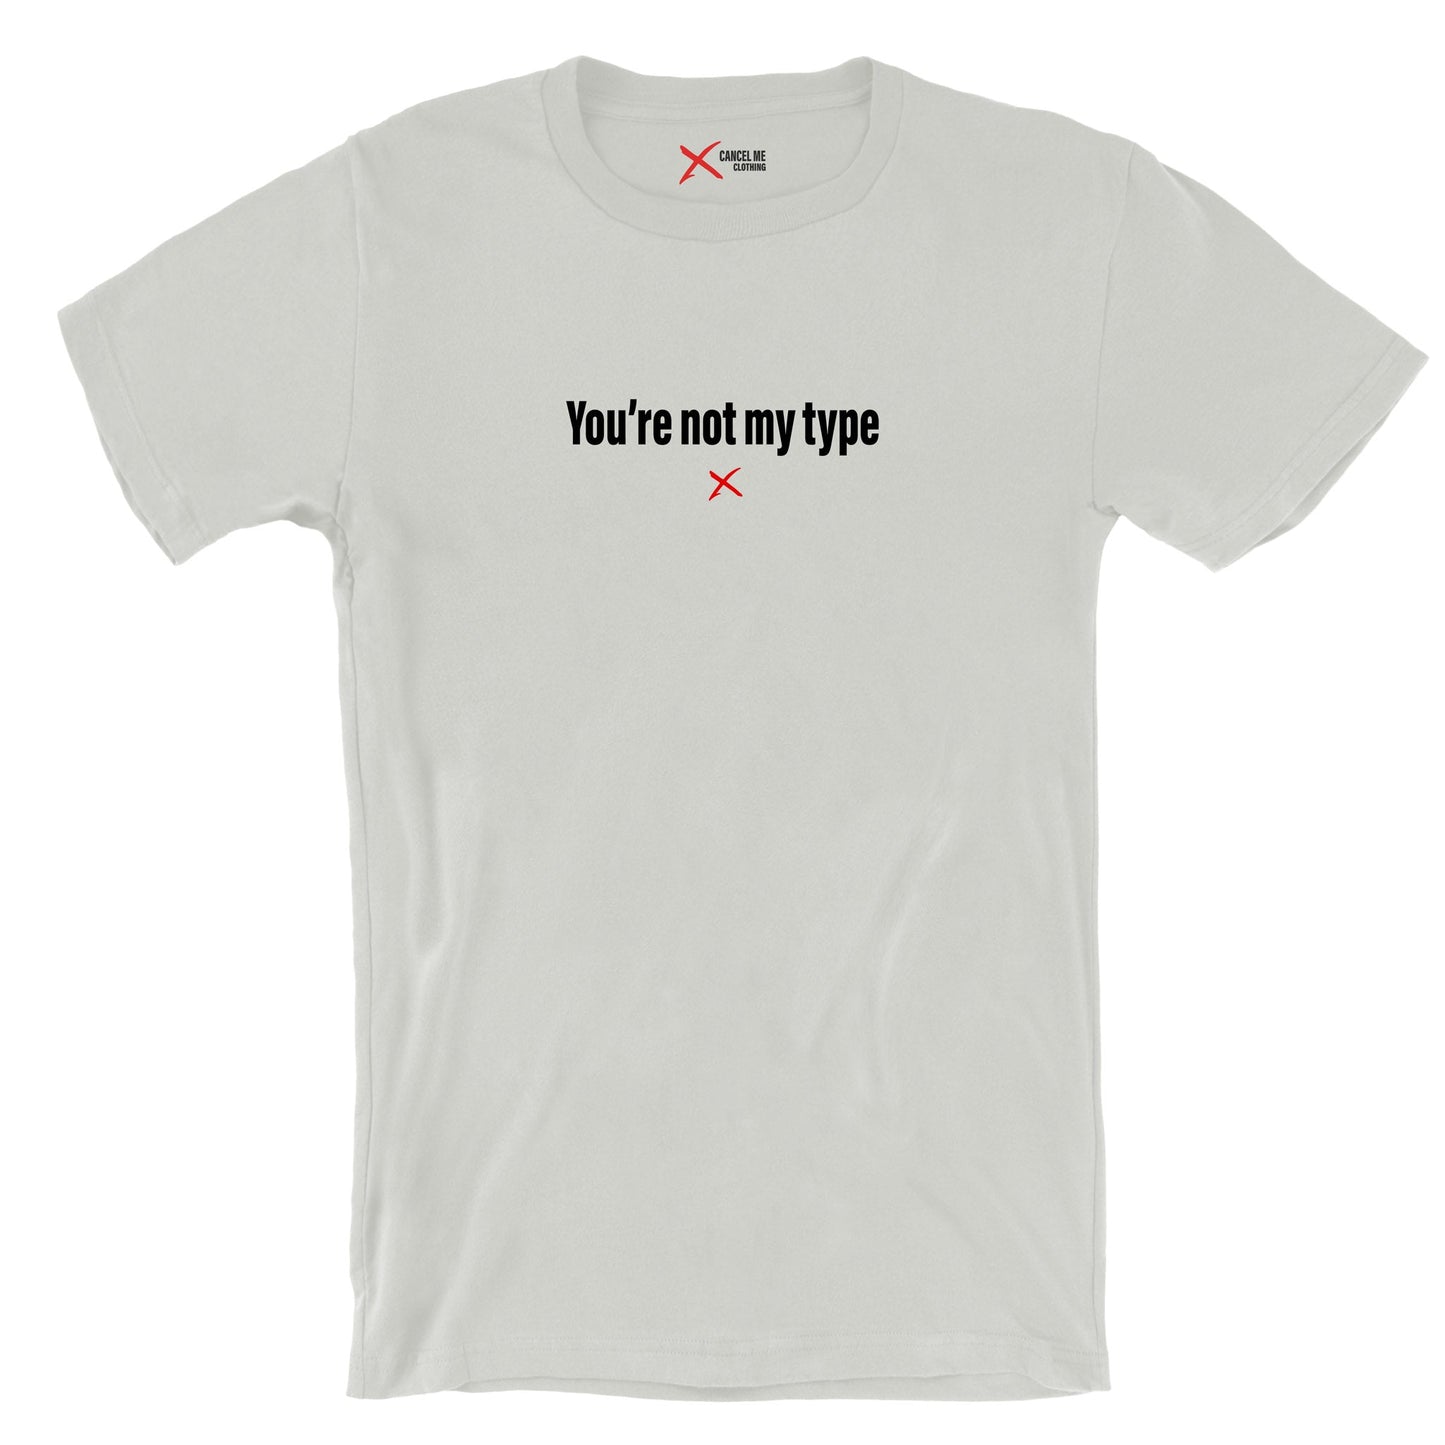 You're not my type - Shirt